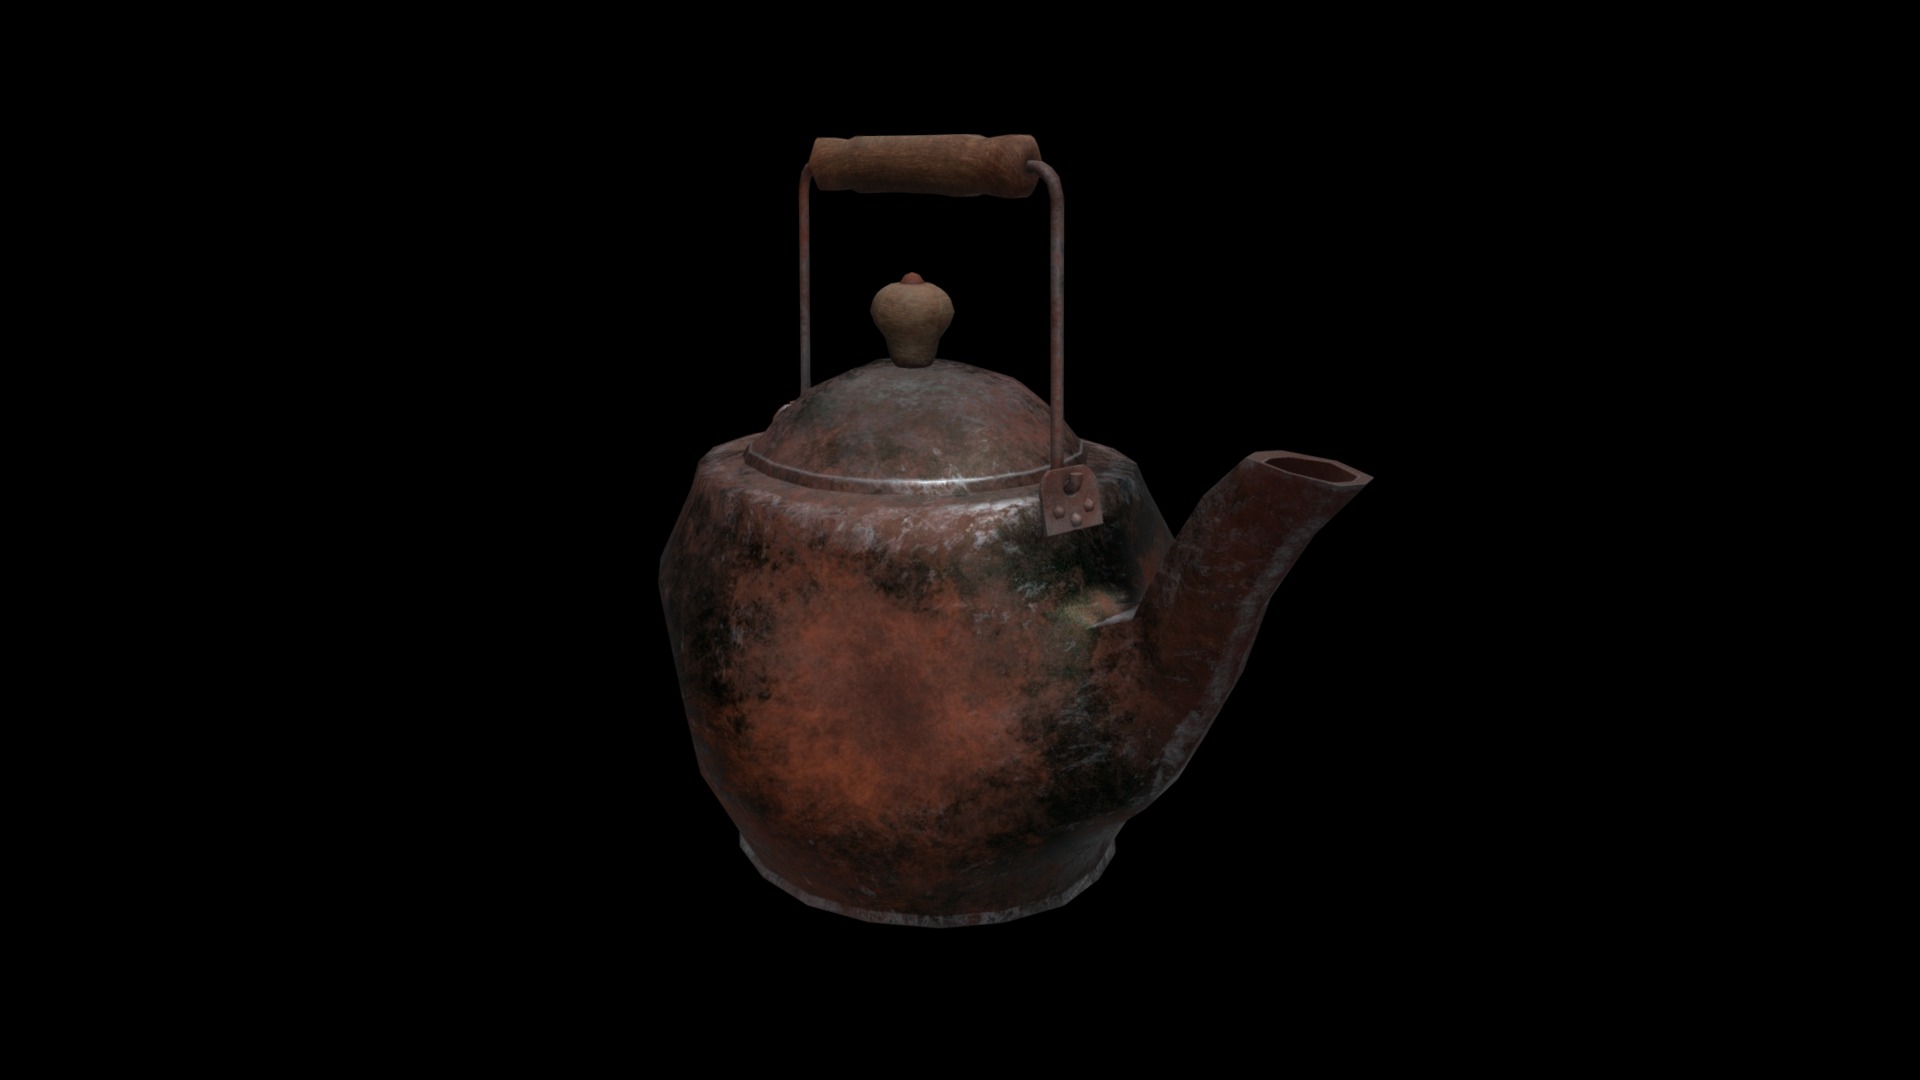 3D model Very Old Teapot - This is a 3D model of the Very Old Teapot. The 3D model is about a teapot with a handle.